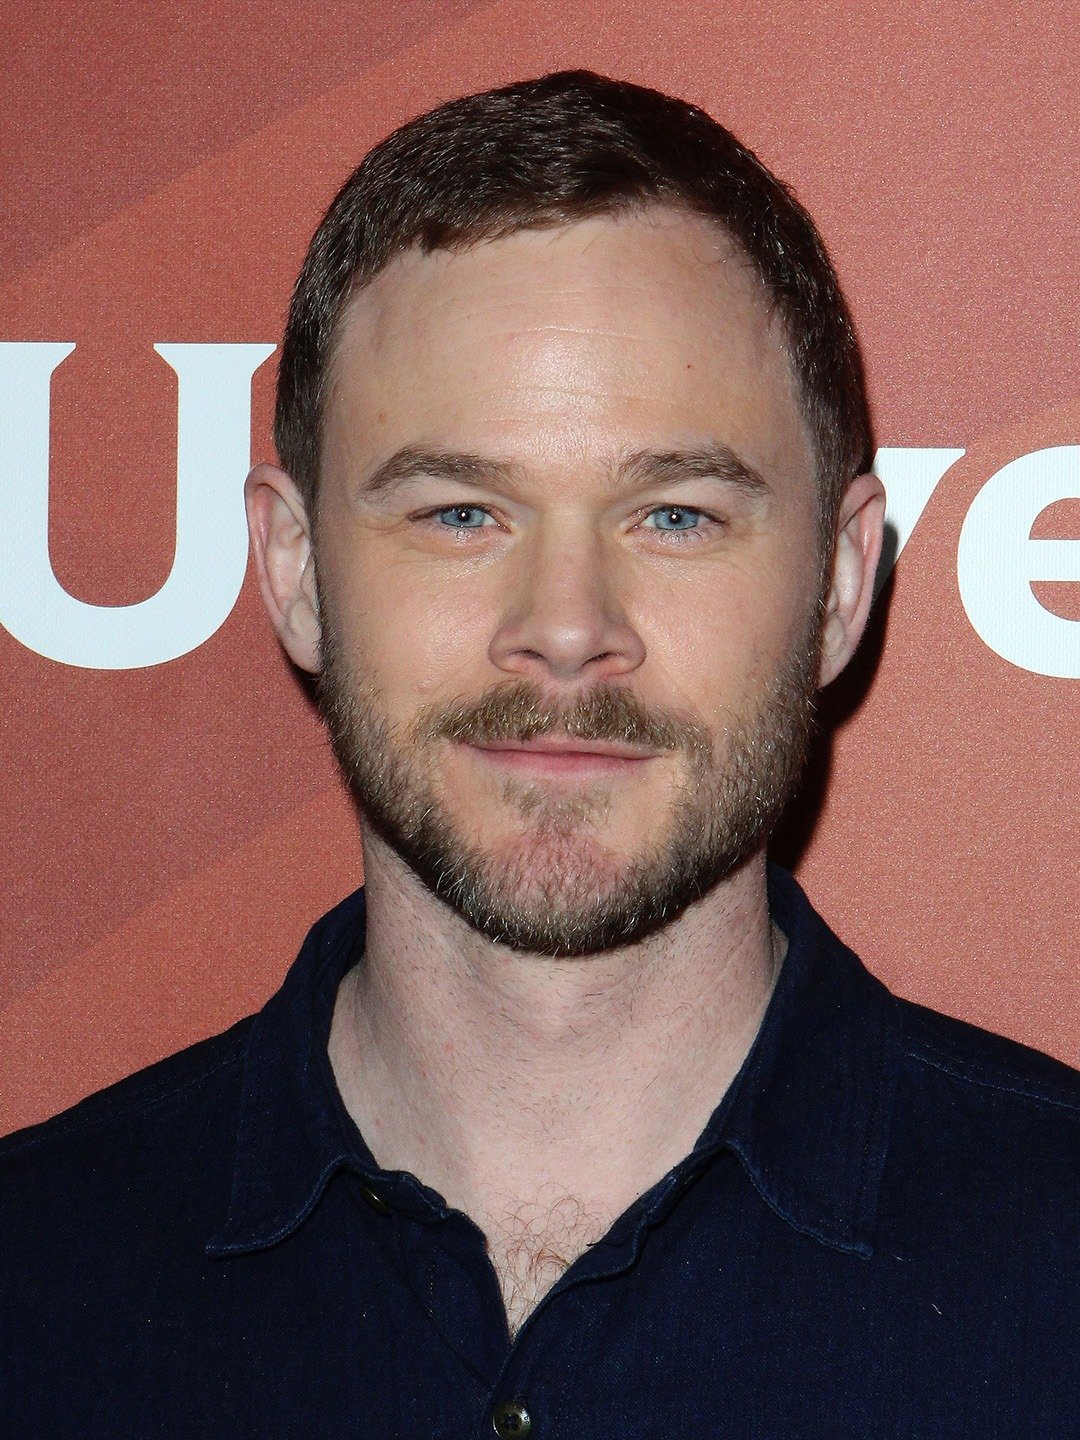 How tall is Aaron Ashmore?